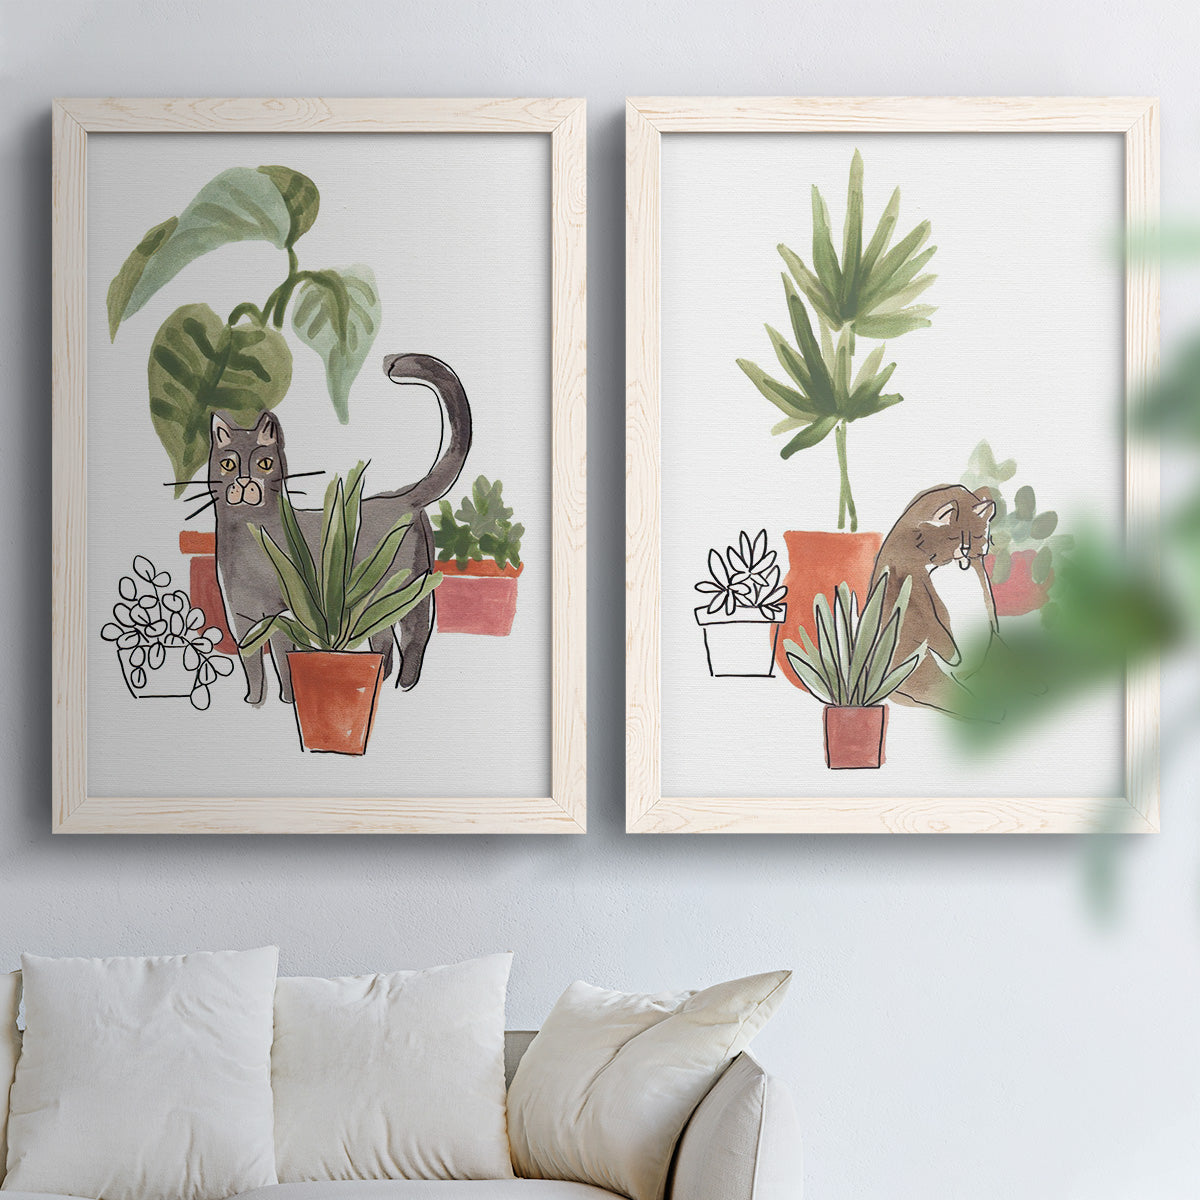 Purrfect Plants I - Premium Framed Canvas 2 Piece Set - Ready to Hang